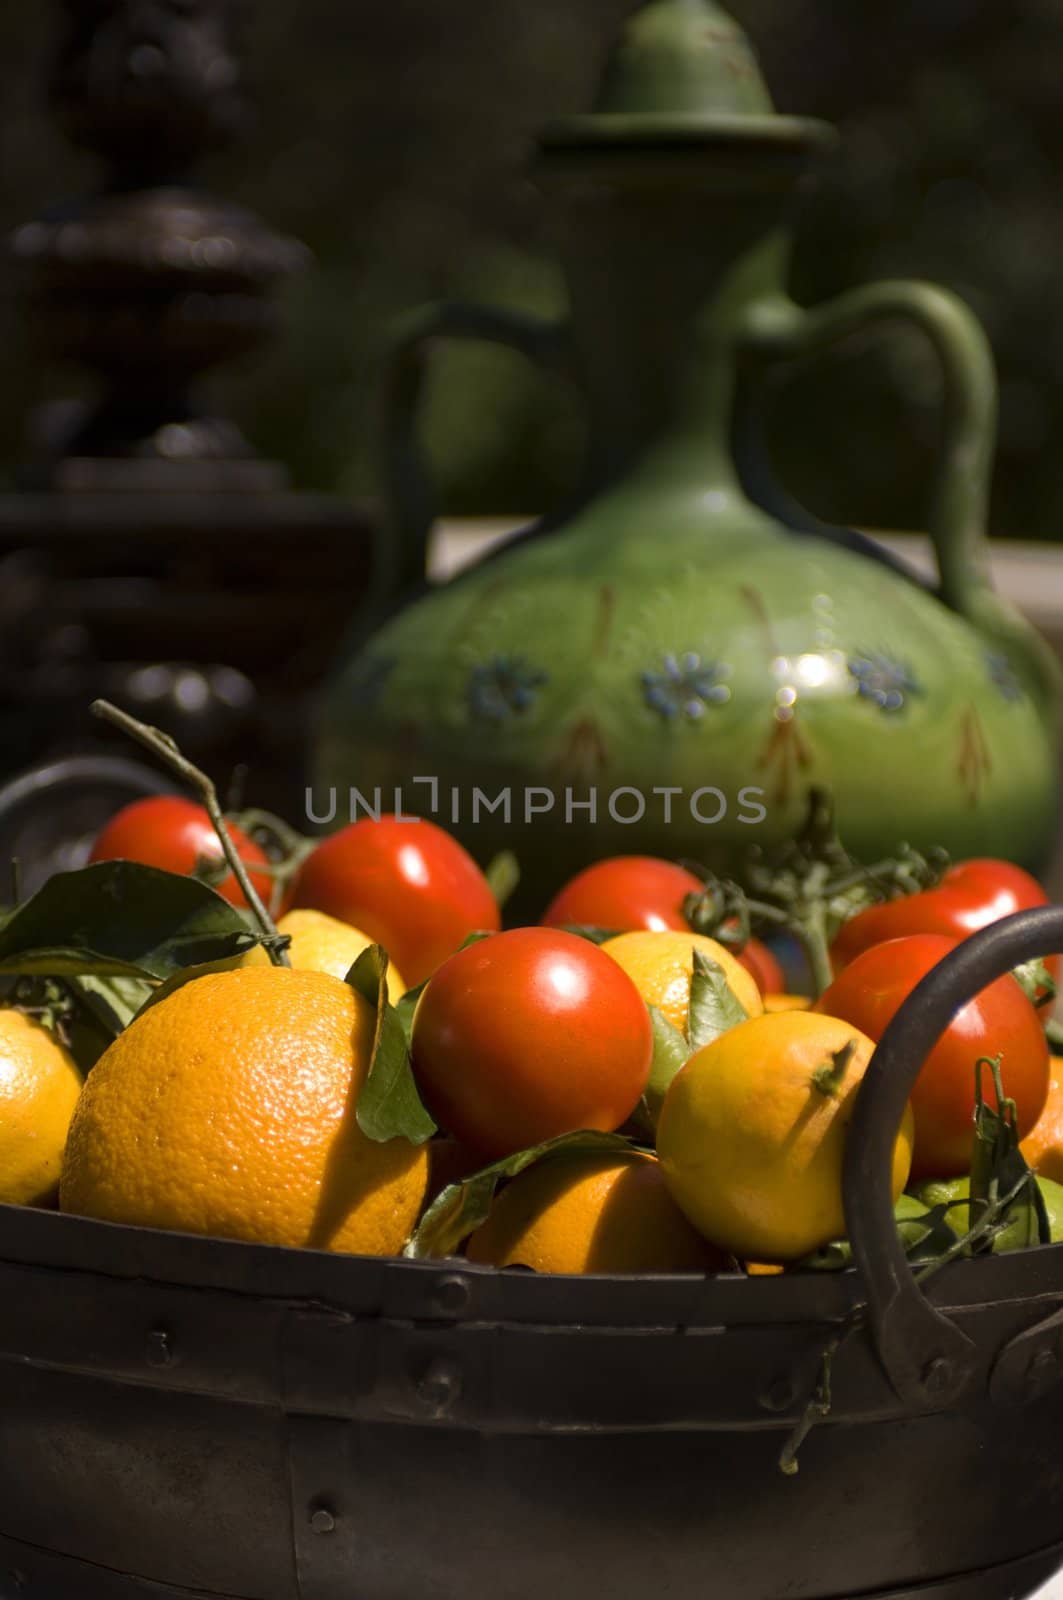 Image of a platter of tomatoes and oranges